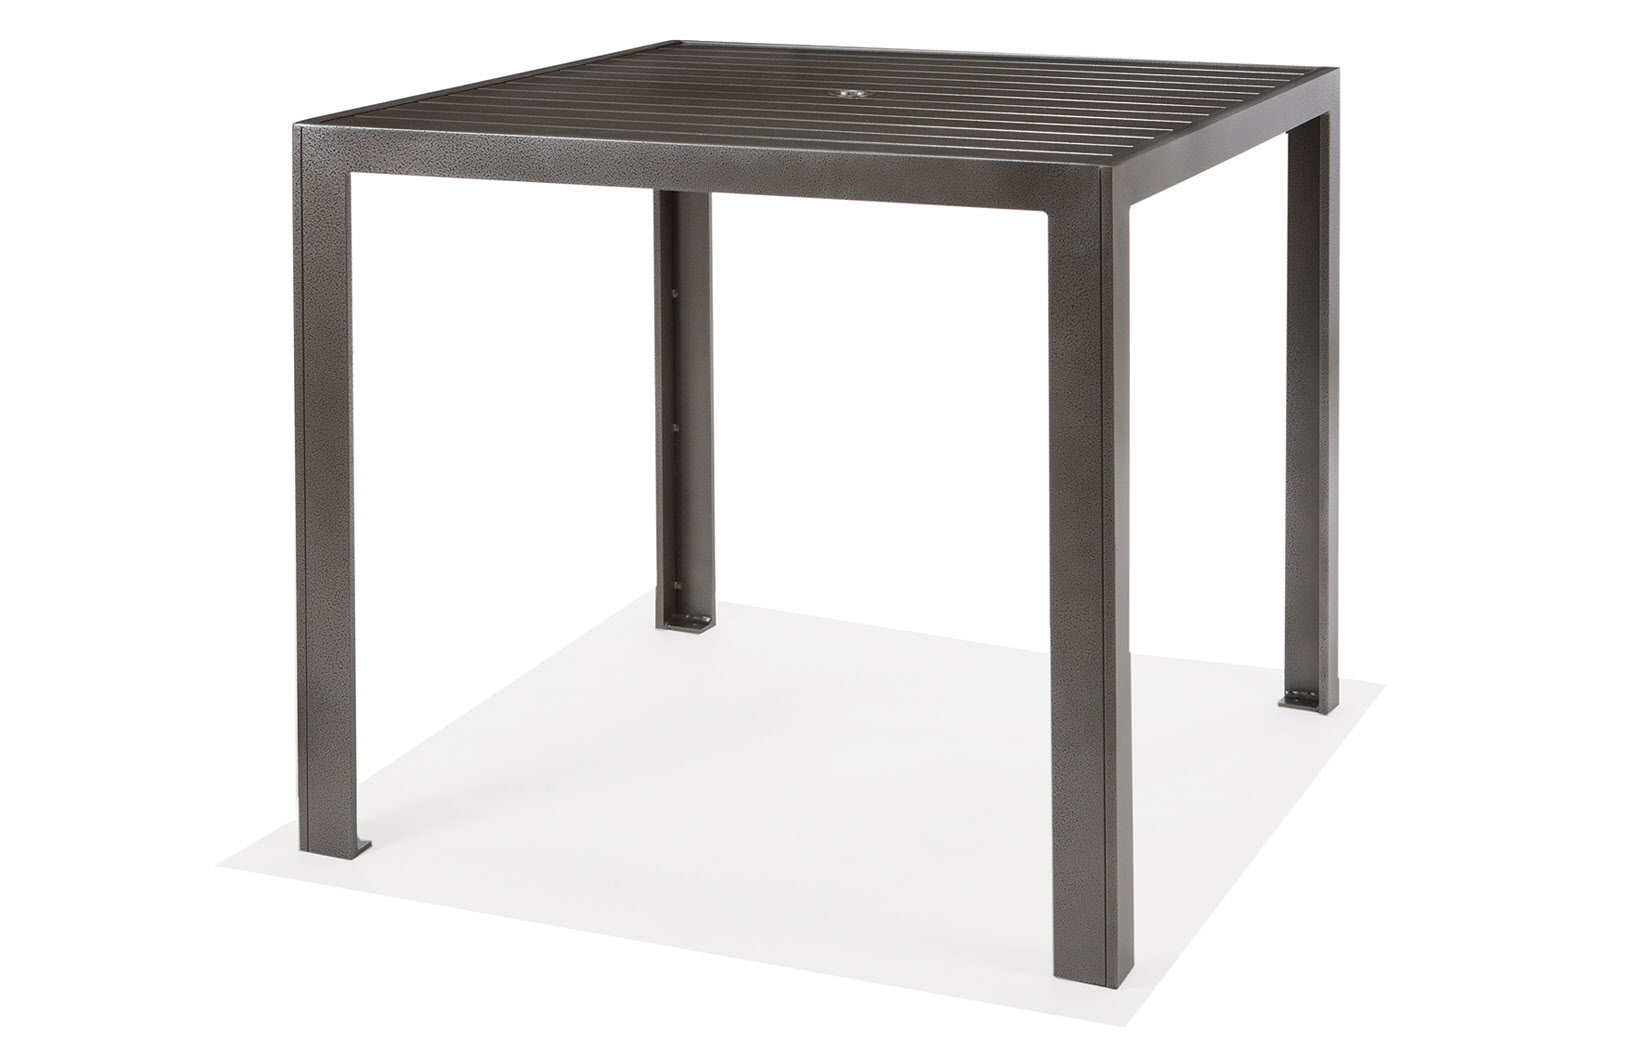 Meza Slat Collection 42 Inch Square Bar Table